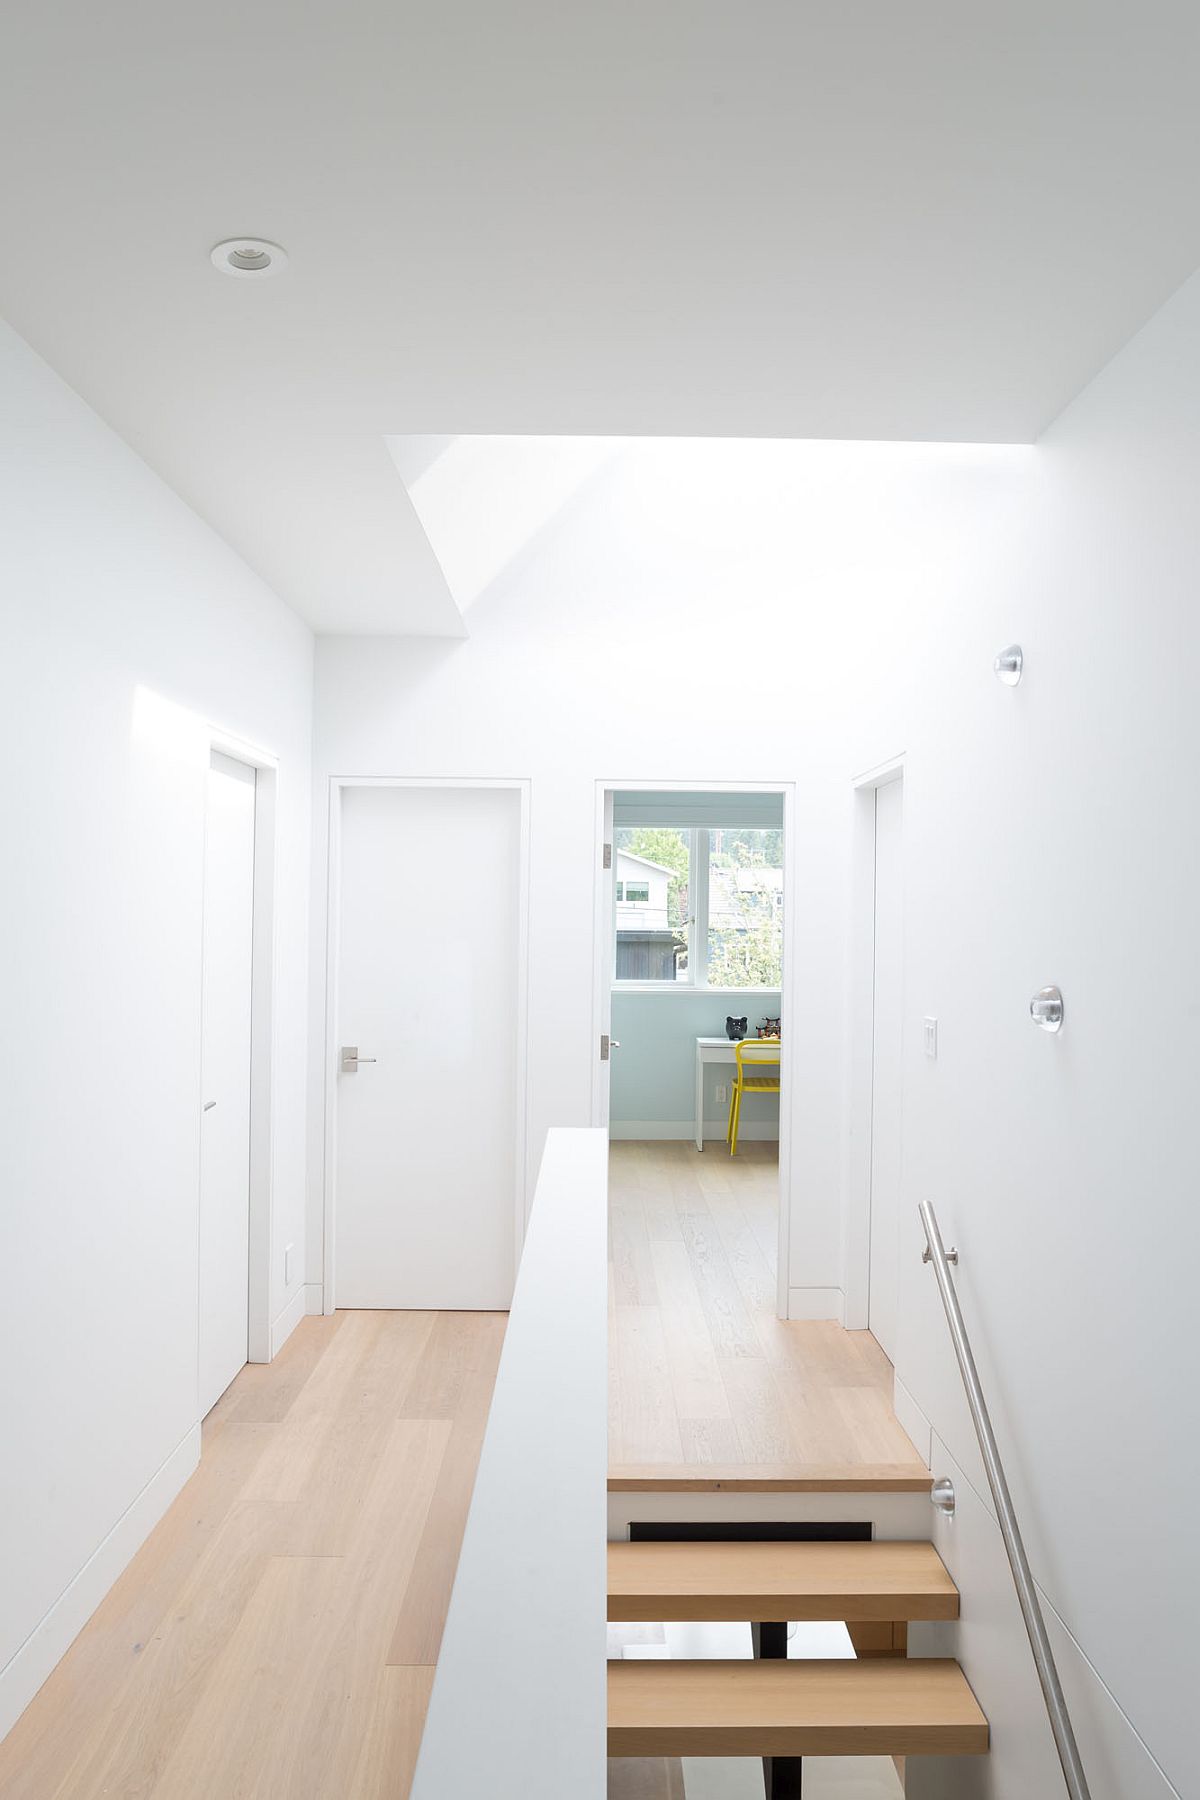 Skylight brings natural light into both the levels of the house thanks to the open stairwell